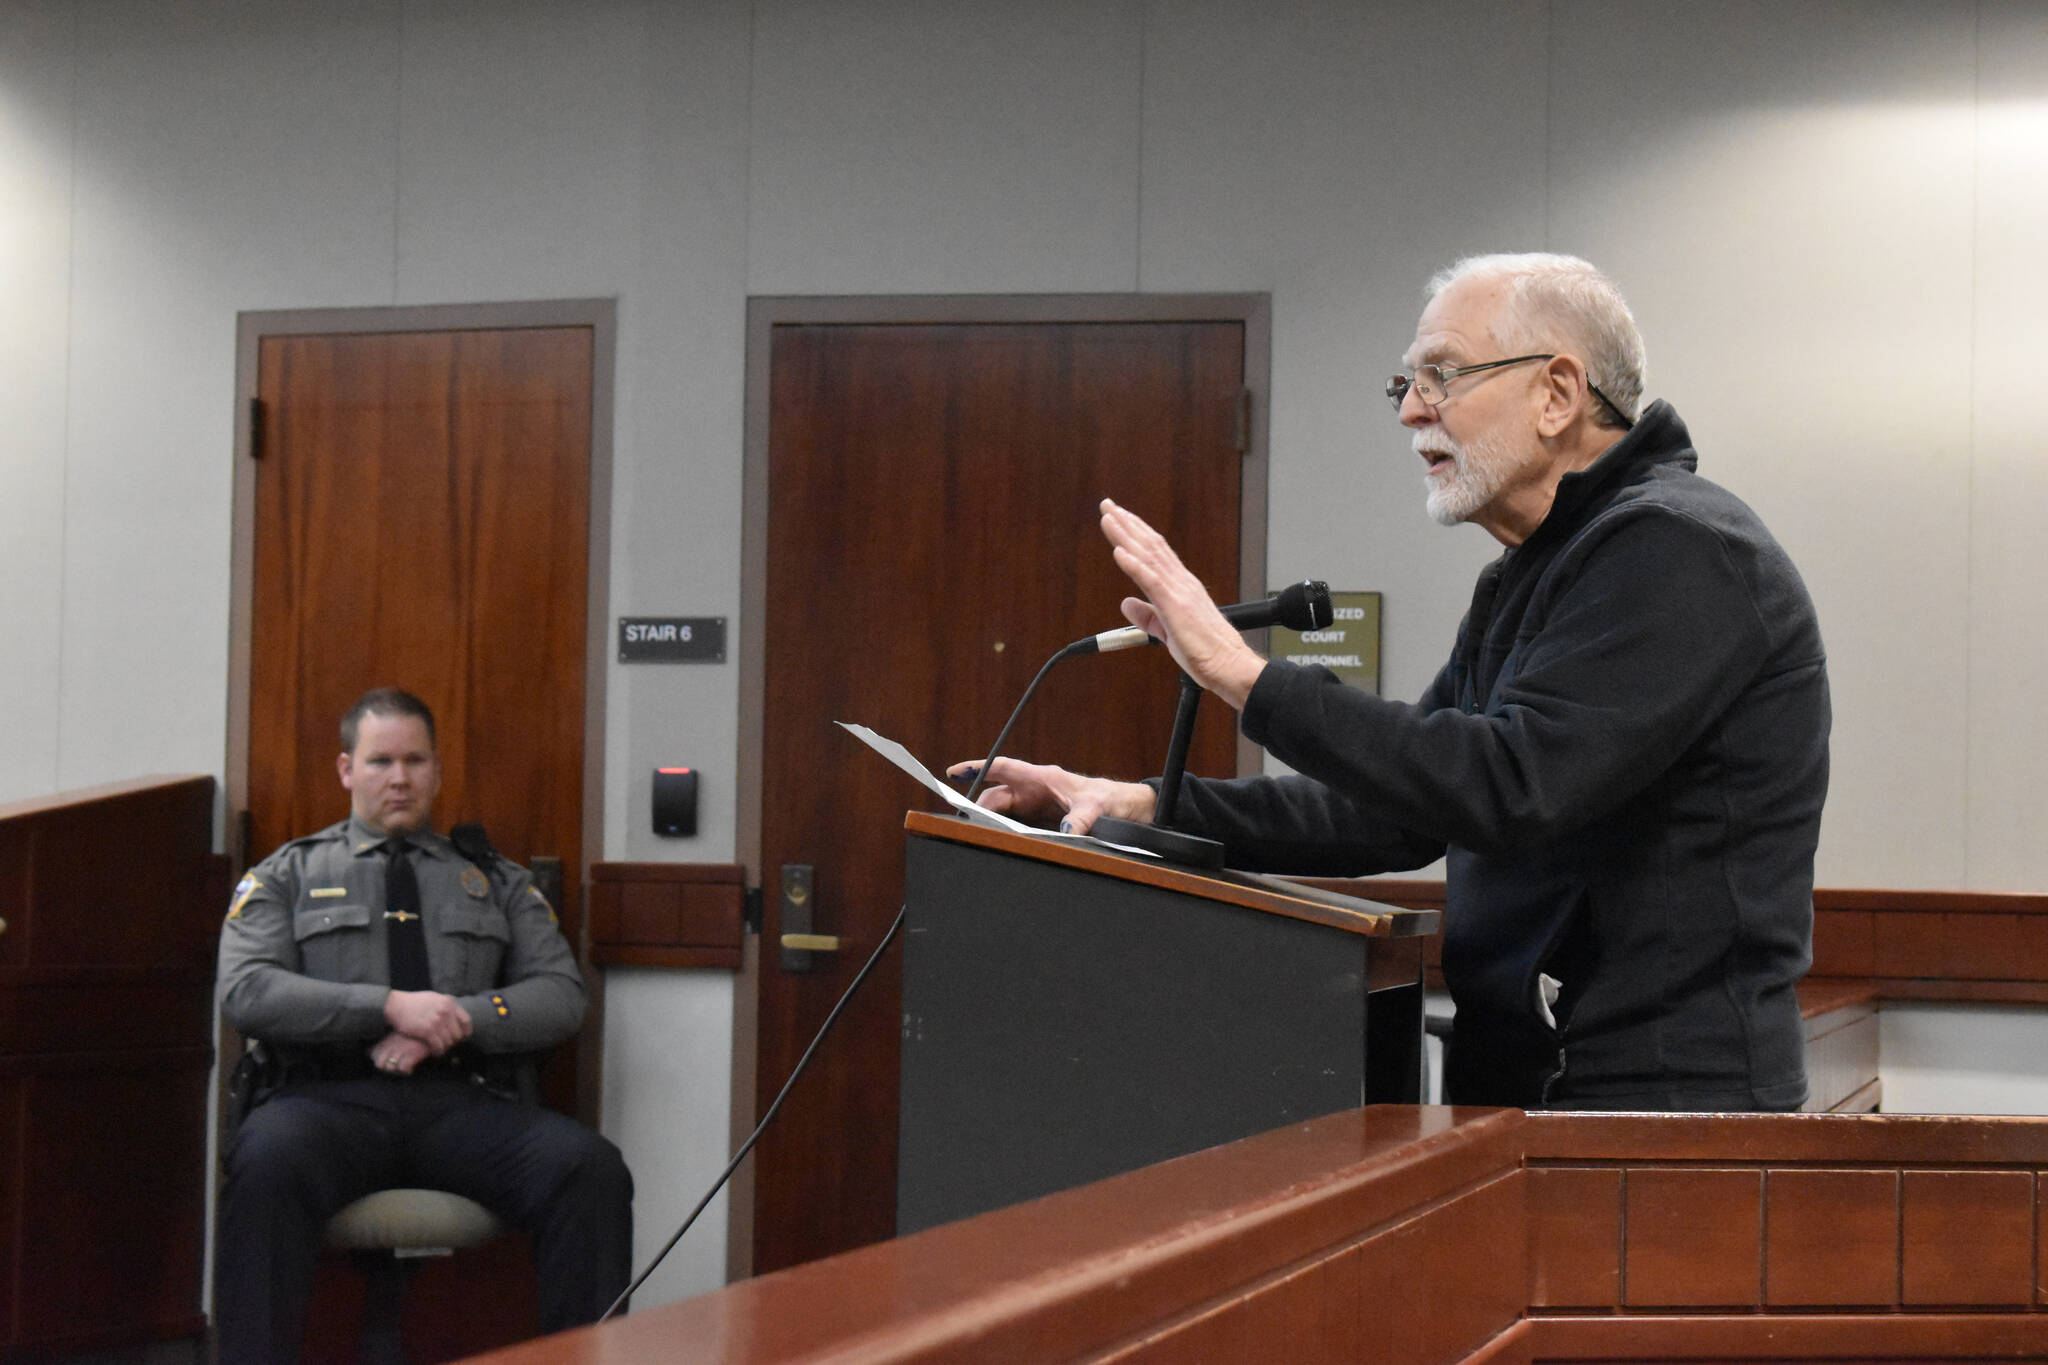 Ray Southwell speaks during the public hearing held as part of the selection process for a new Kenai Superior Court Judge on Monday, Jan. 23, 2023, at the Kenai Courthouse in Kenai, Alaska. (Jake Dye/Peninsula Clarion)